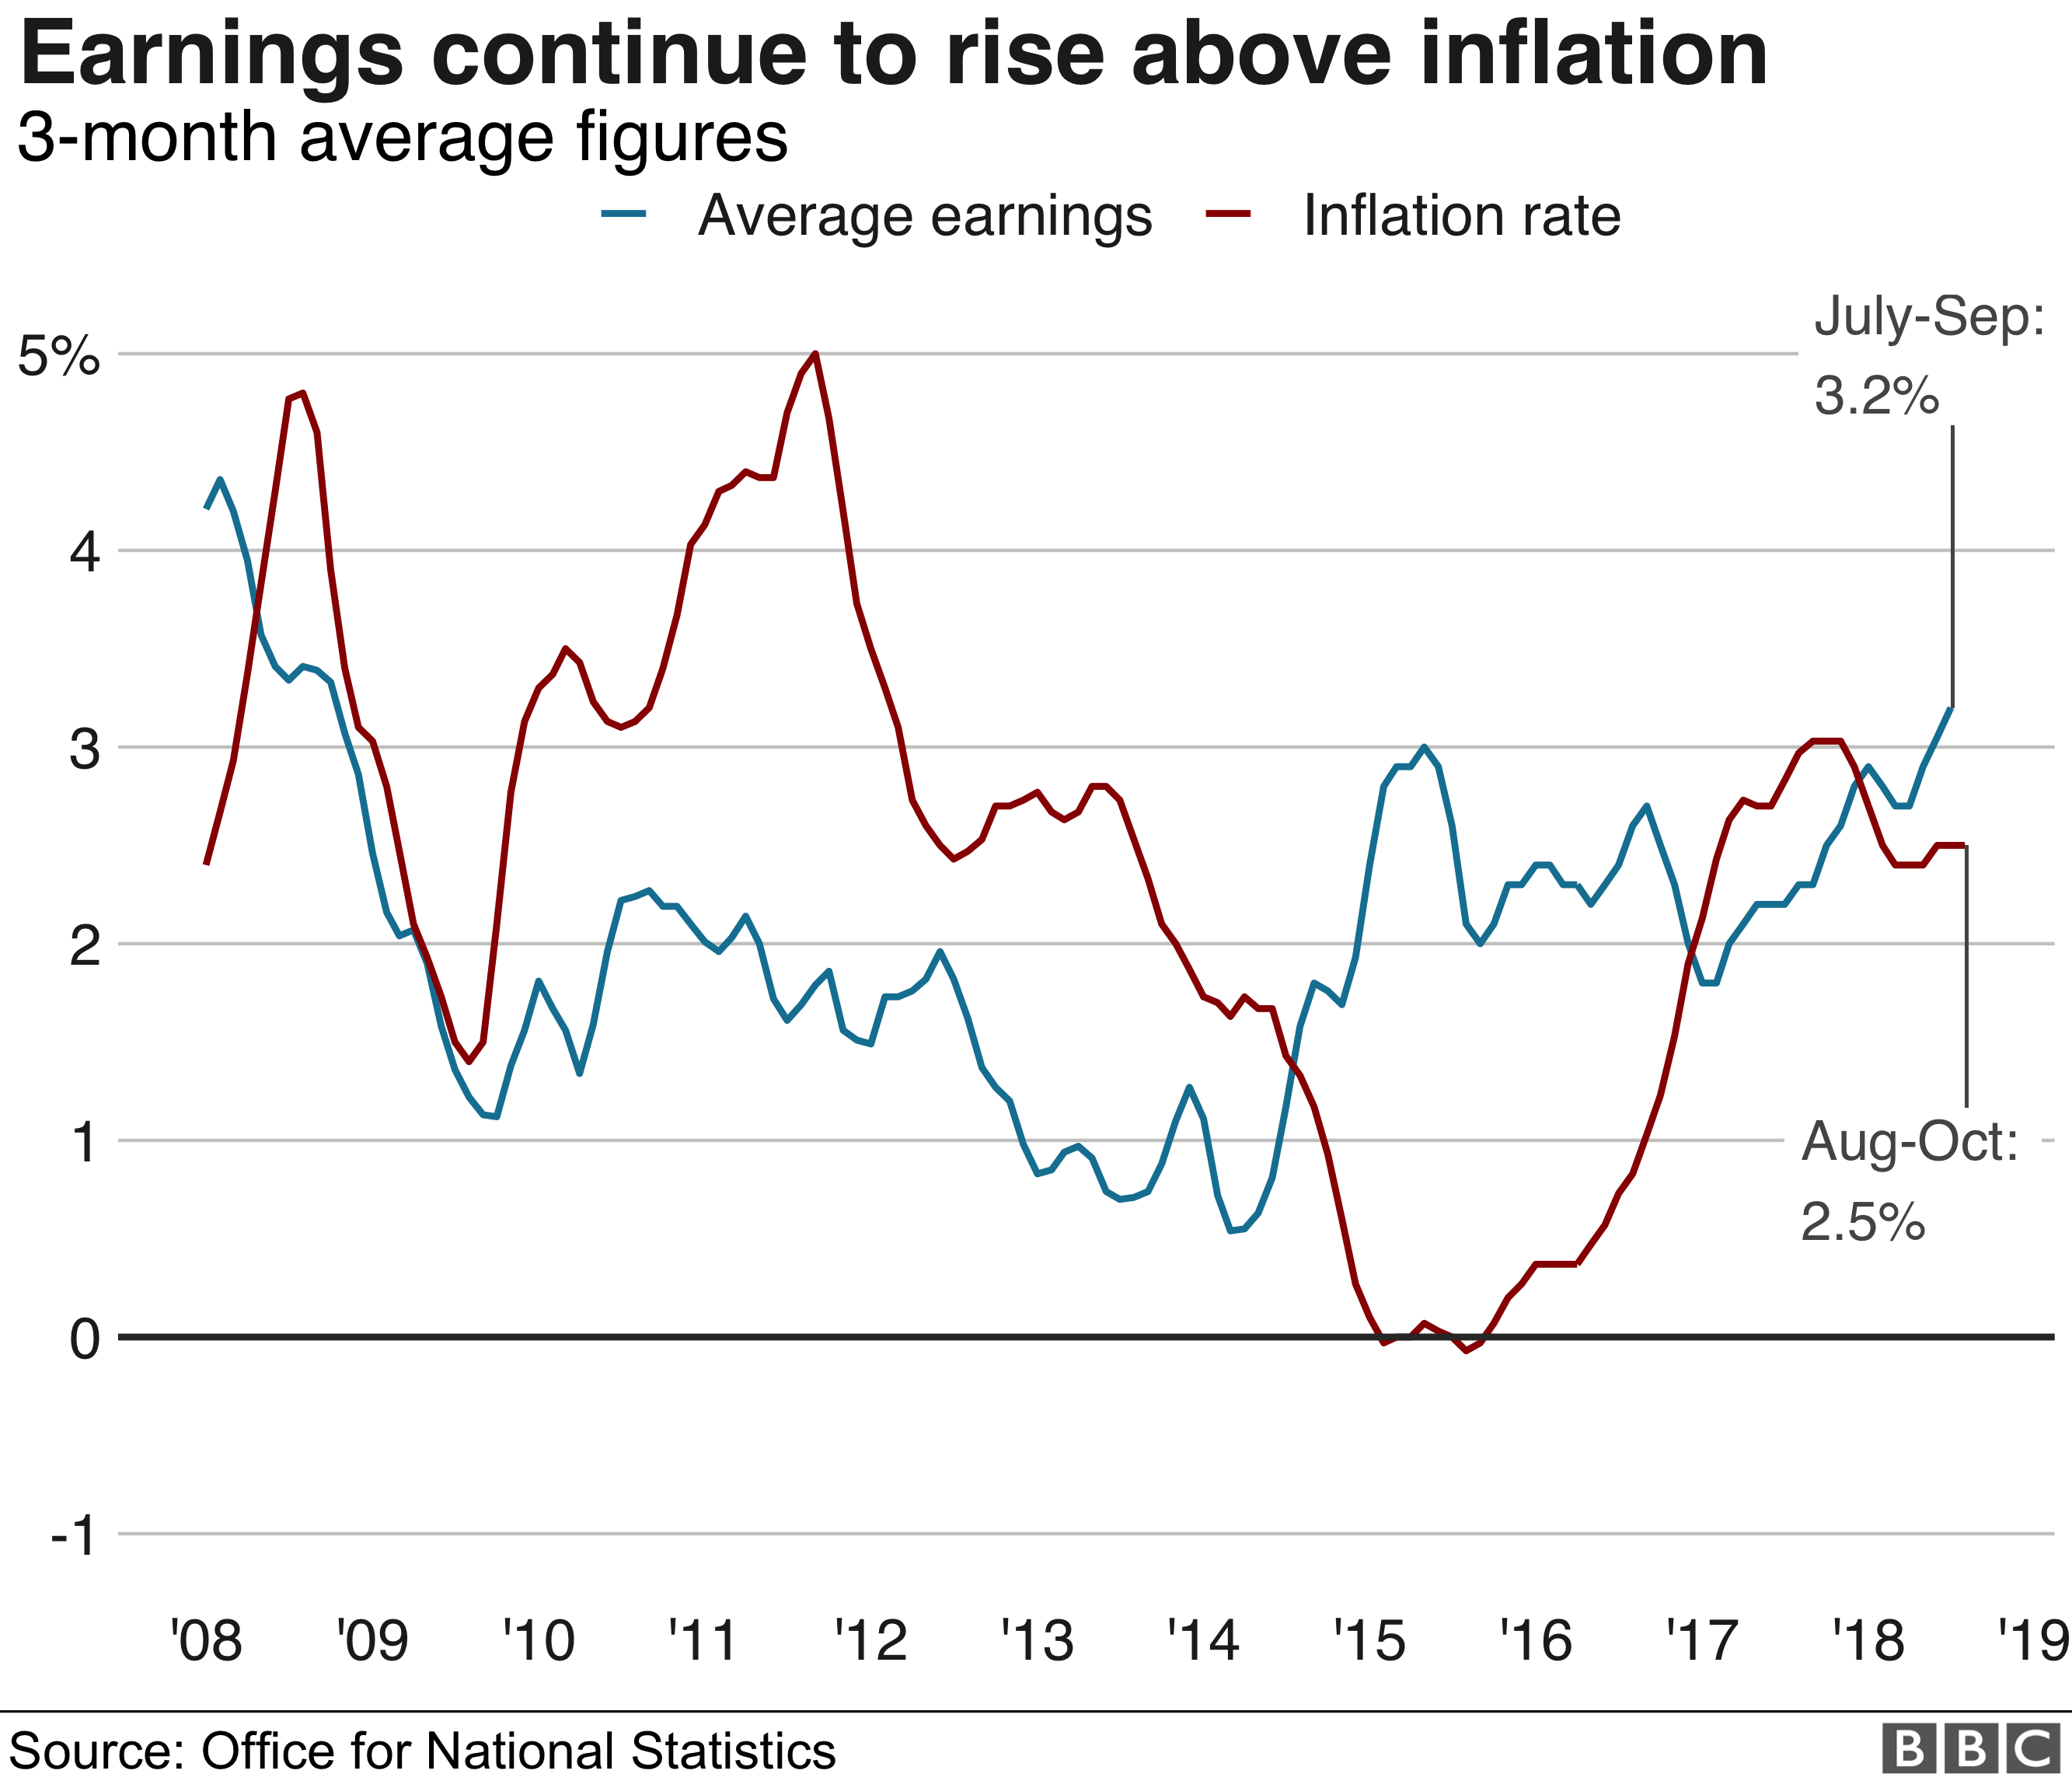 Earnings and inflation